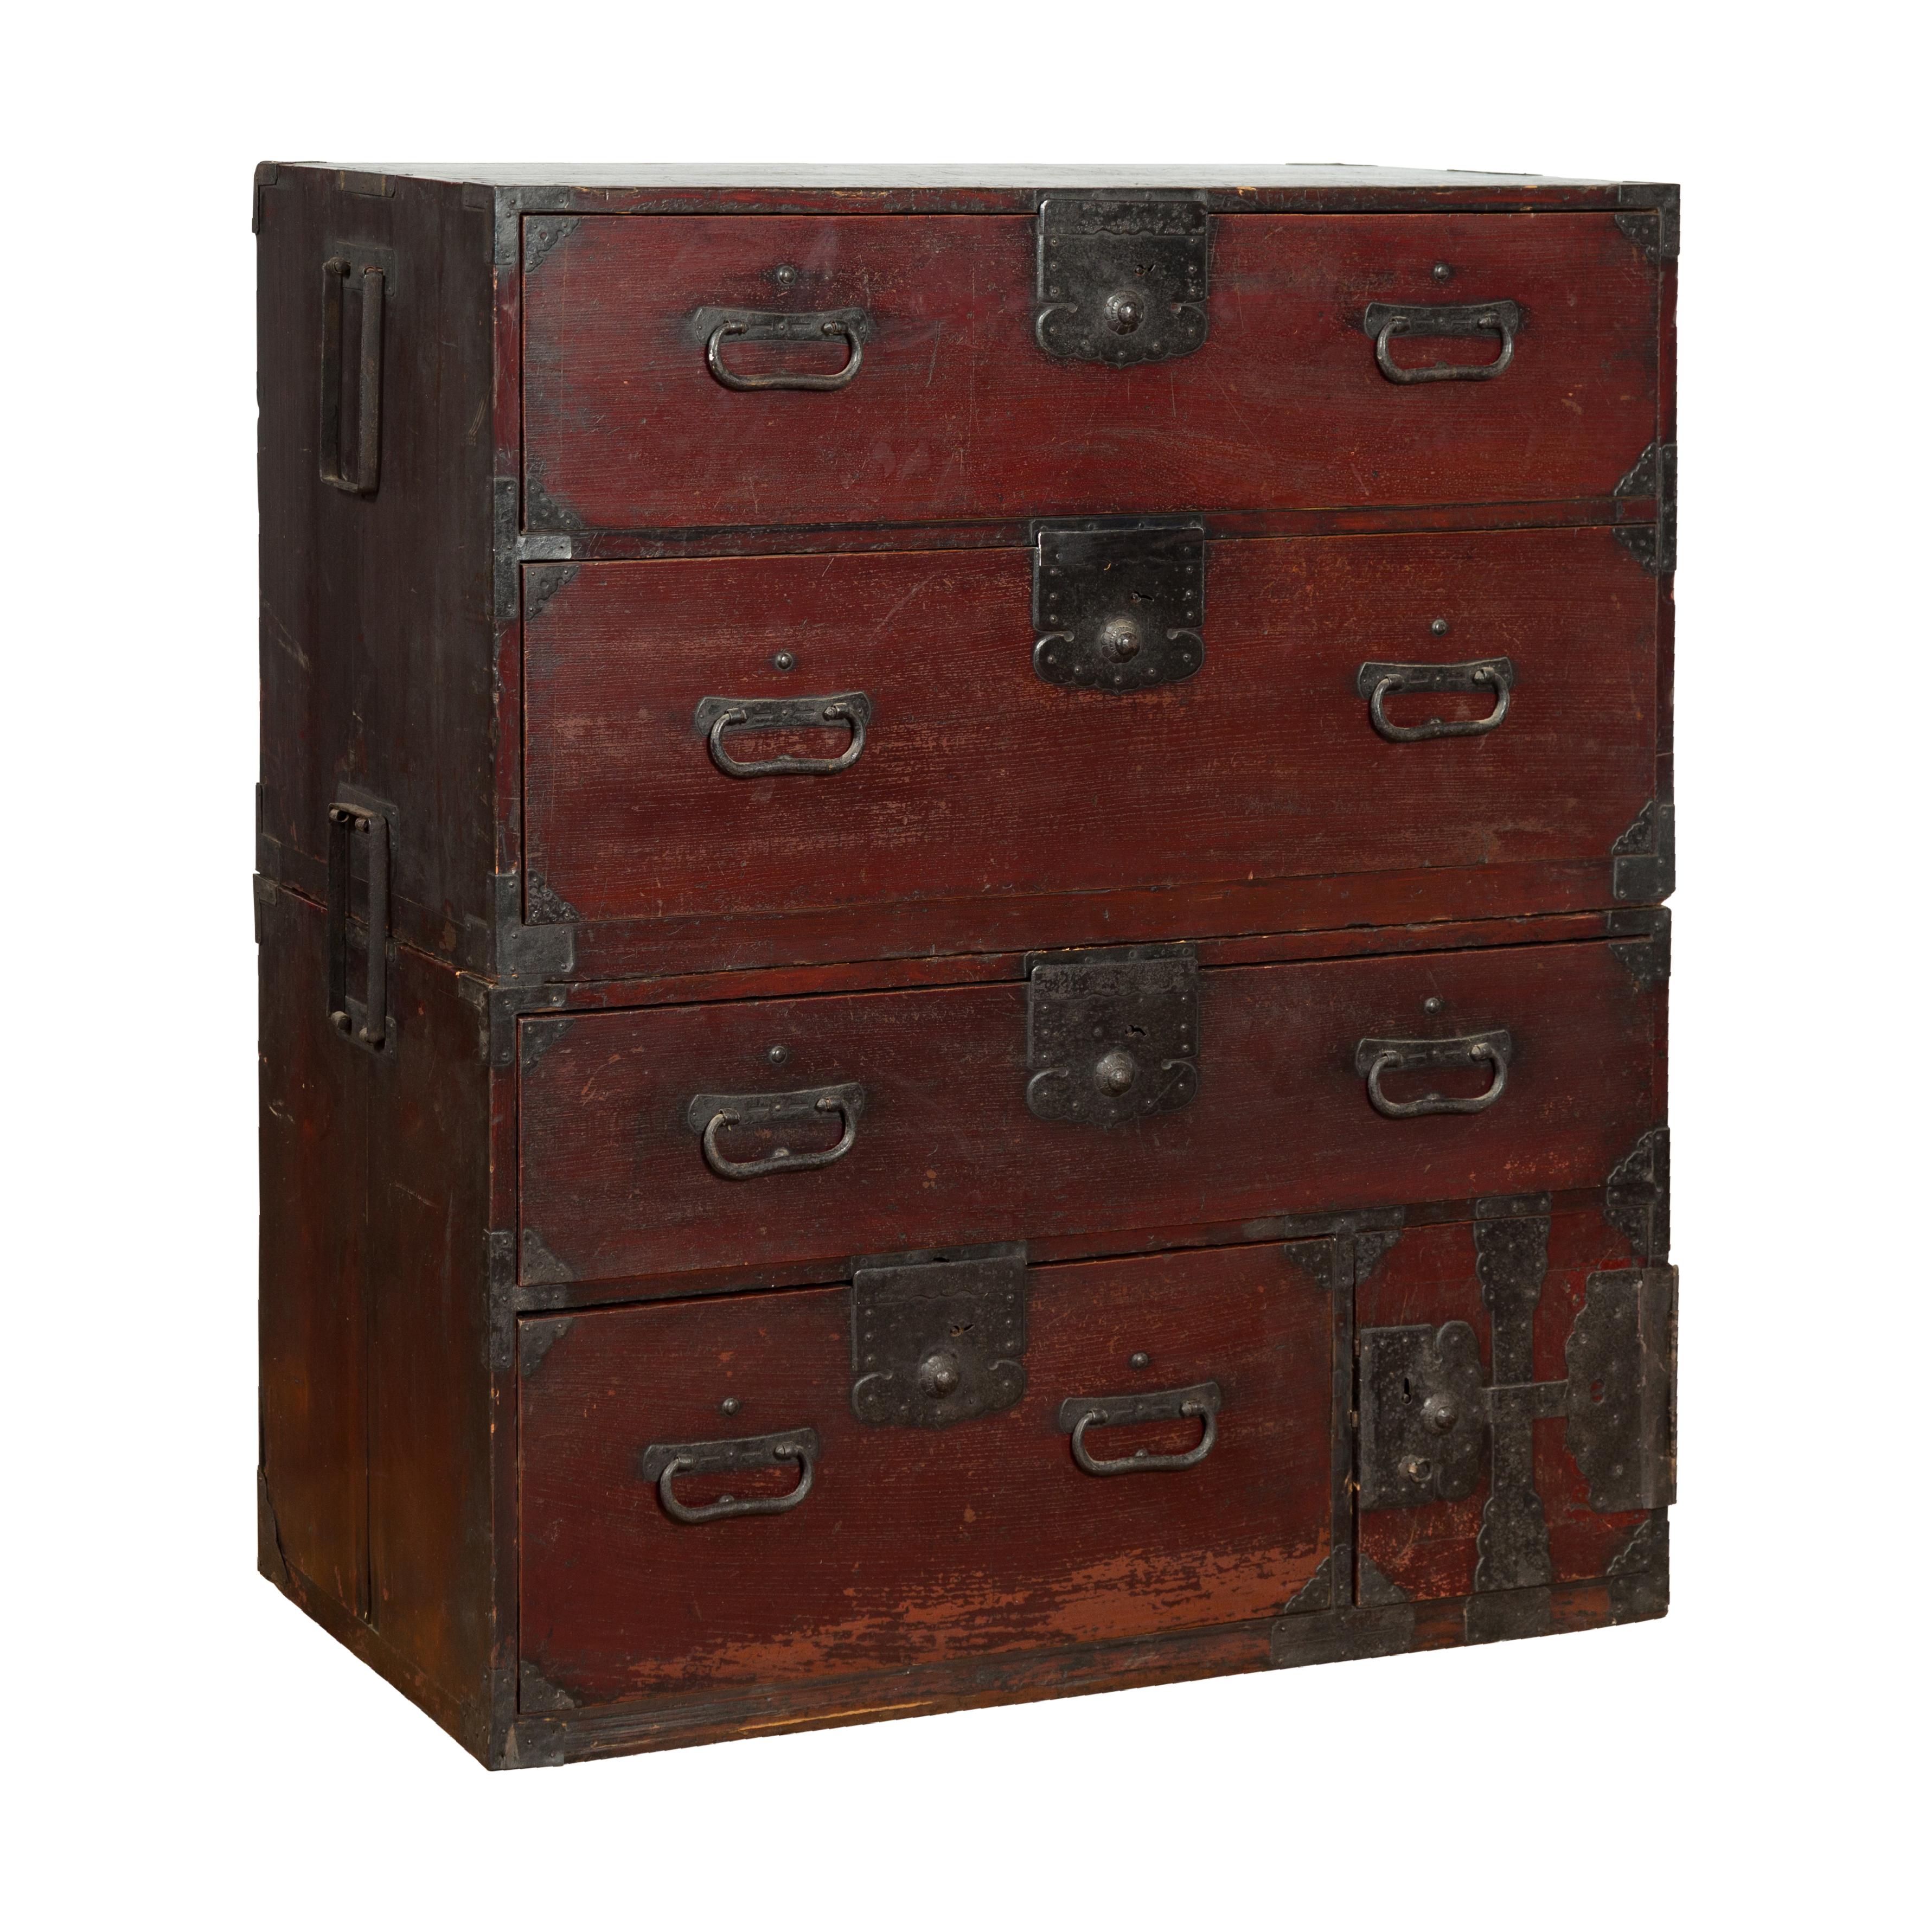 Japanese Meiji Period Late 19th Century Isho-Dansu Chest with Iron Hardware For Sale 9